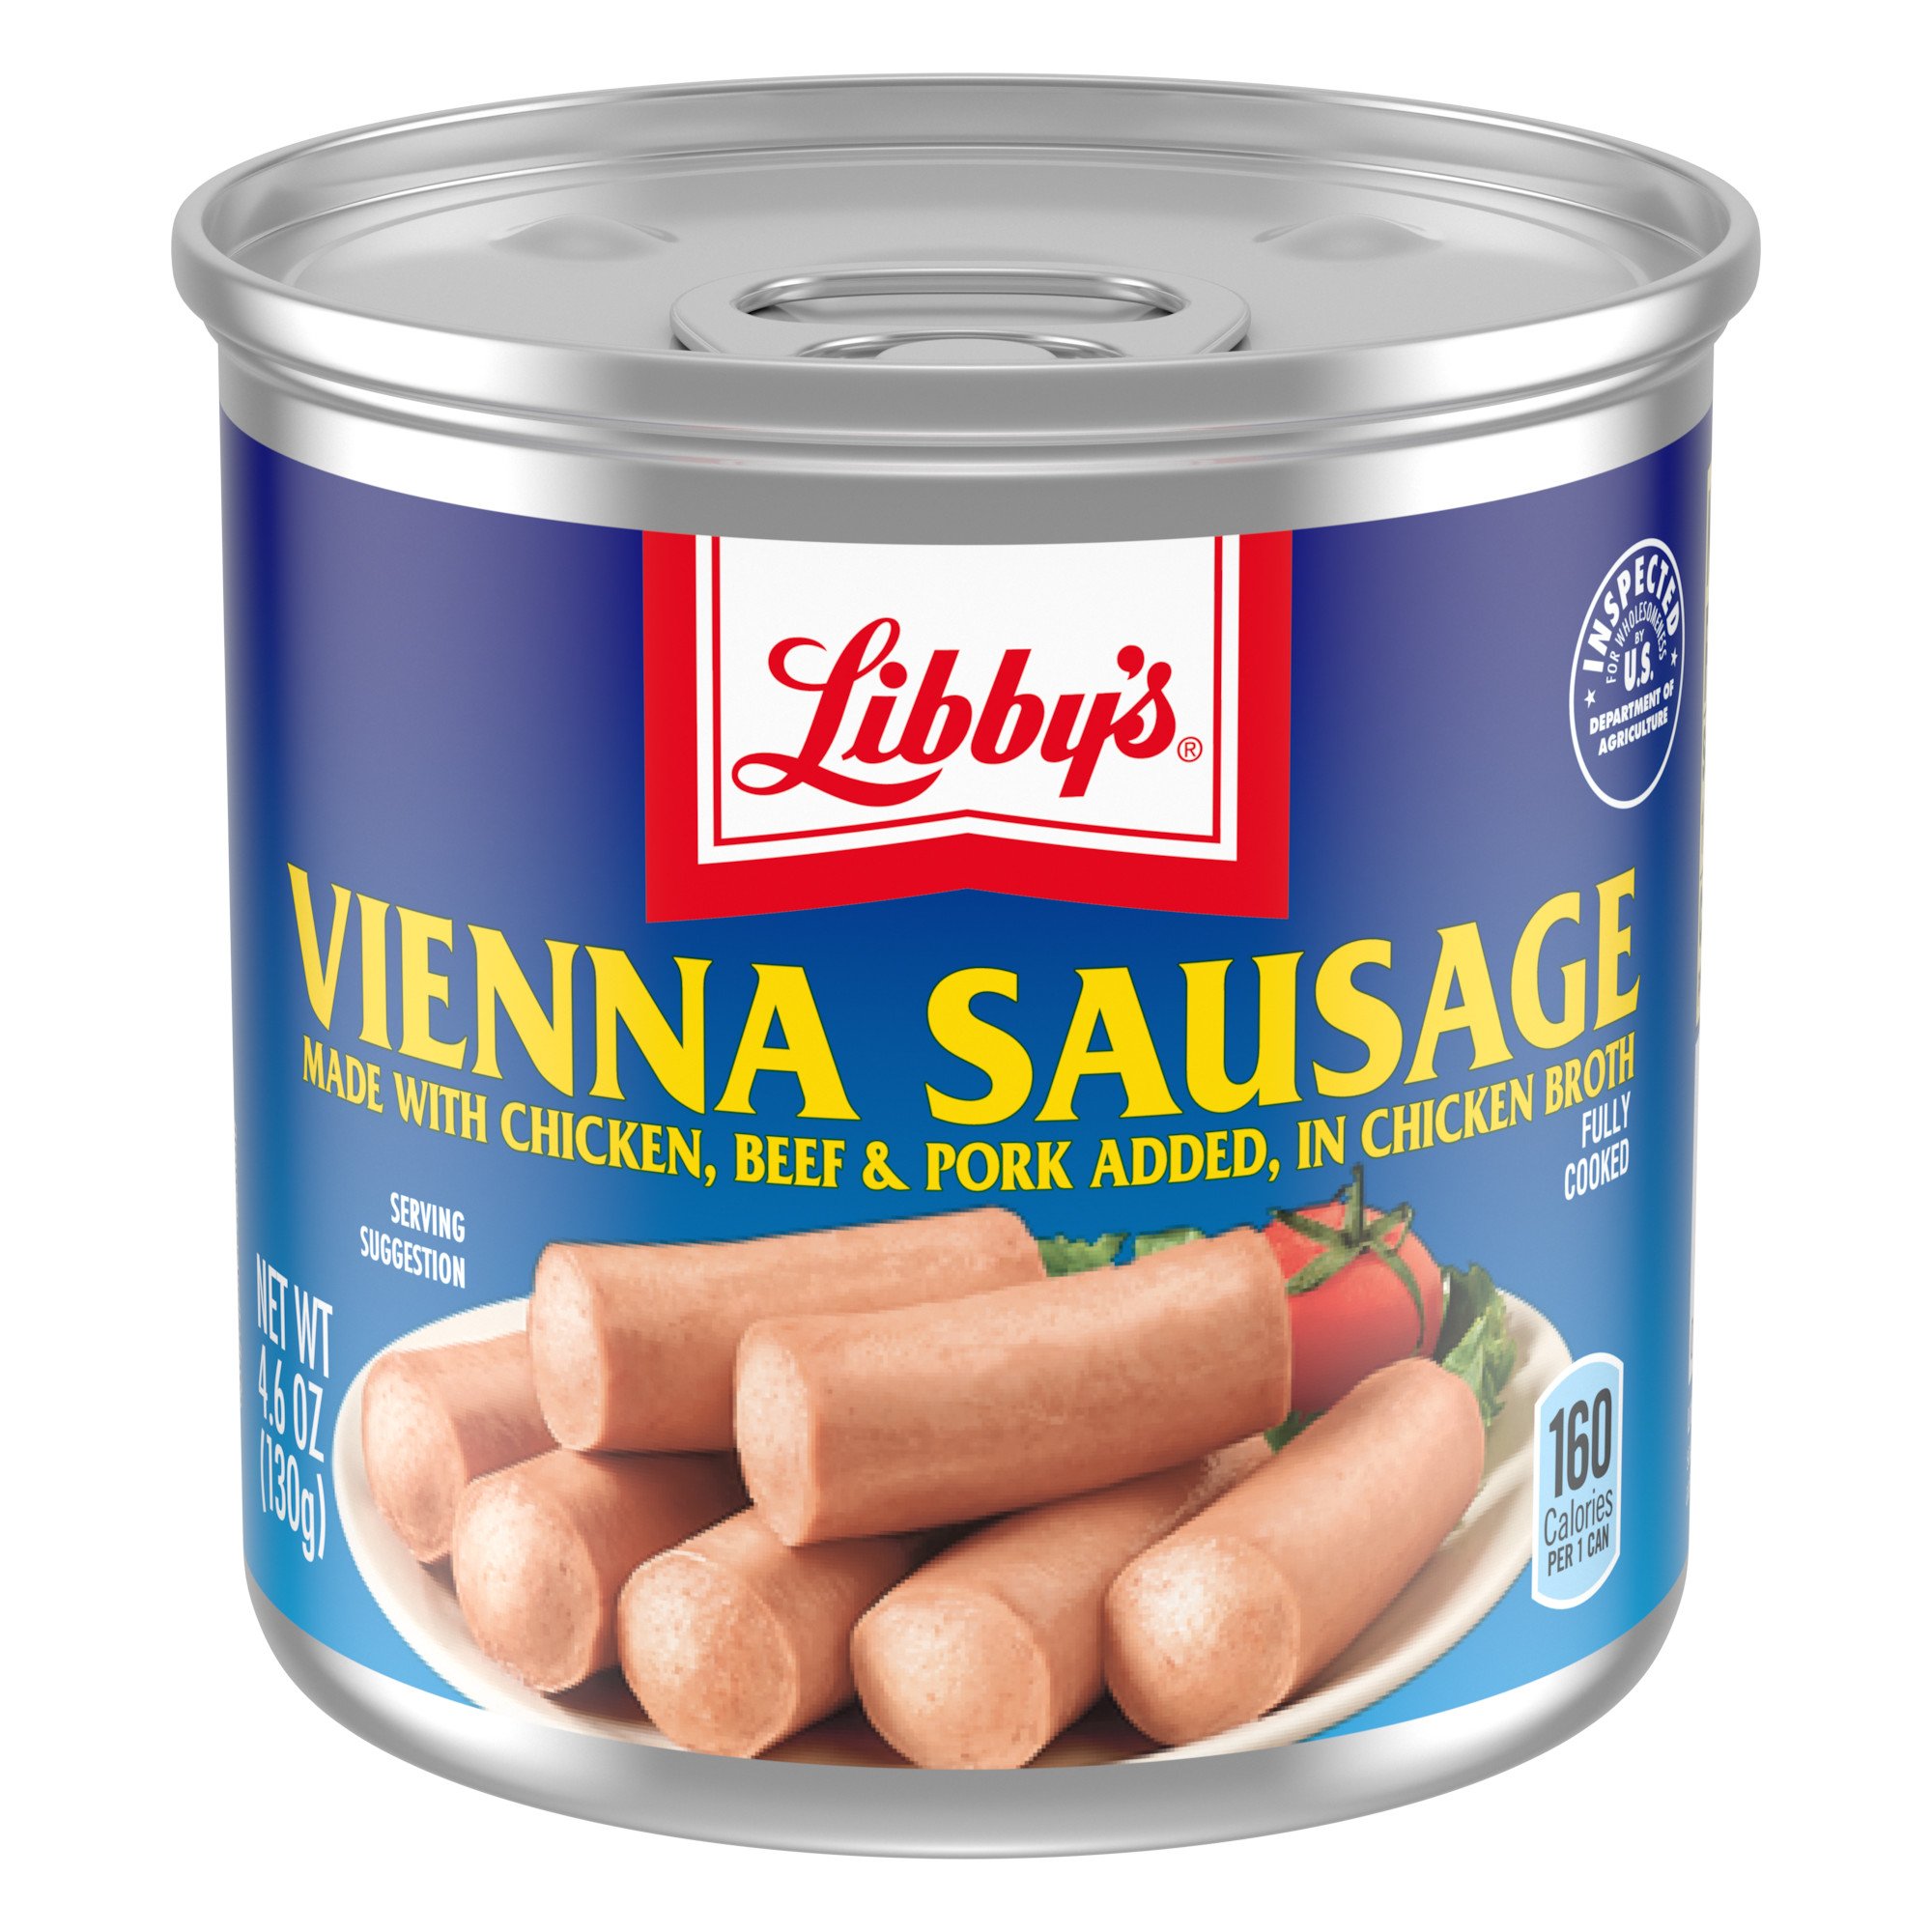 Libby's Vienna Sausage Shop Meat at HEB